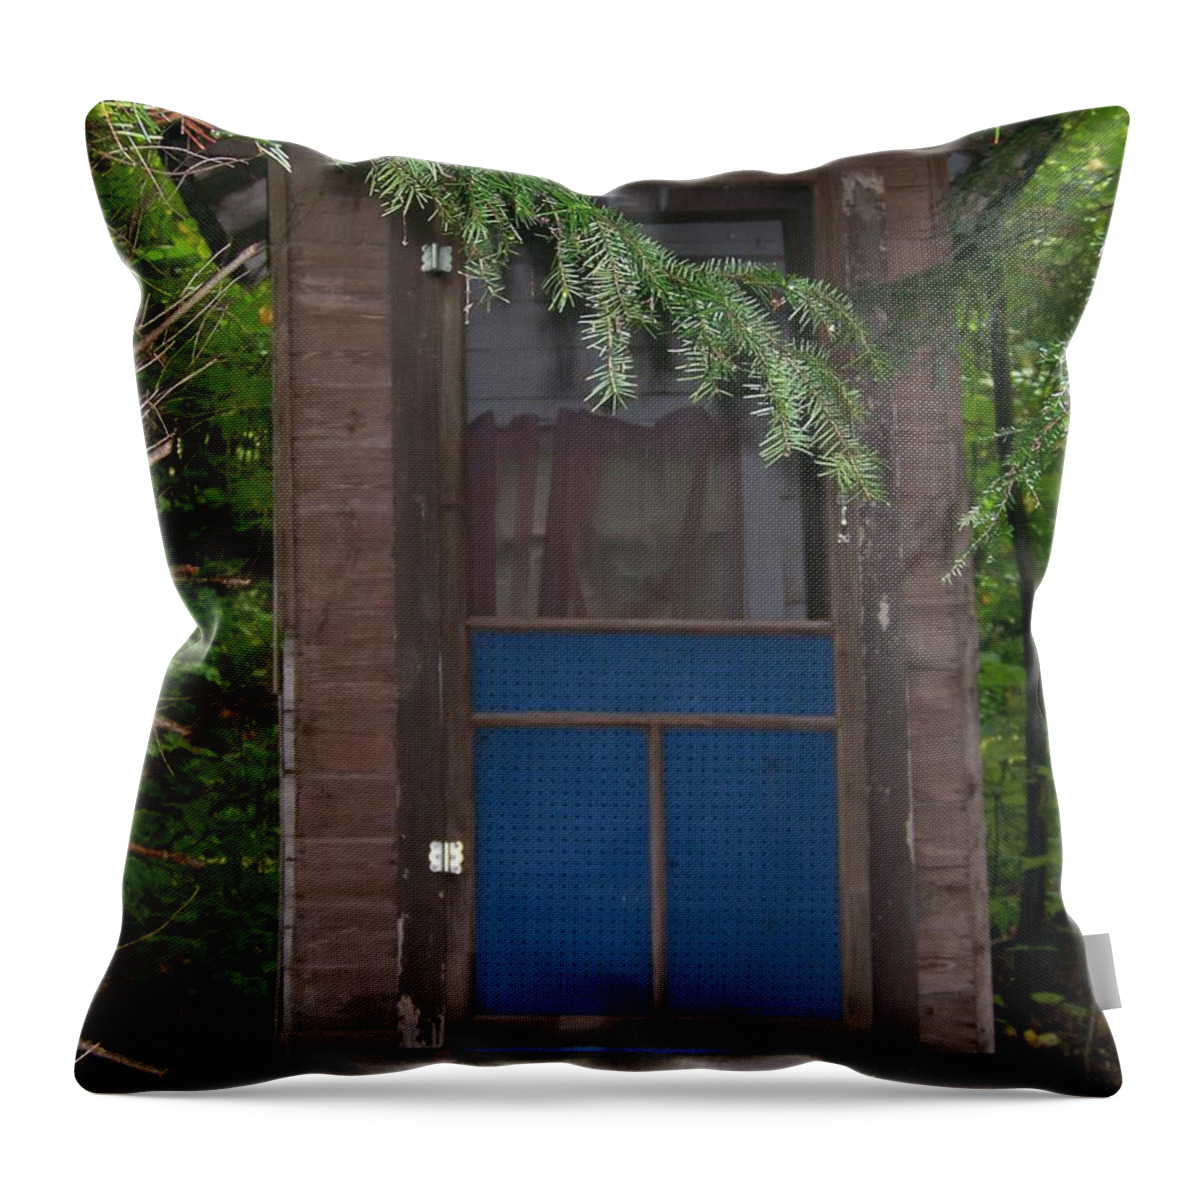 Outhouse Throw Pillow featuring the photograph Our Outhouse - Photograph by Jackie Mueller-Jones